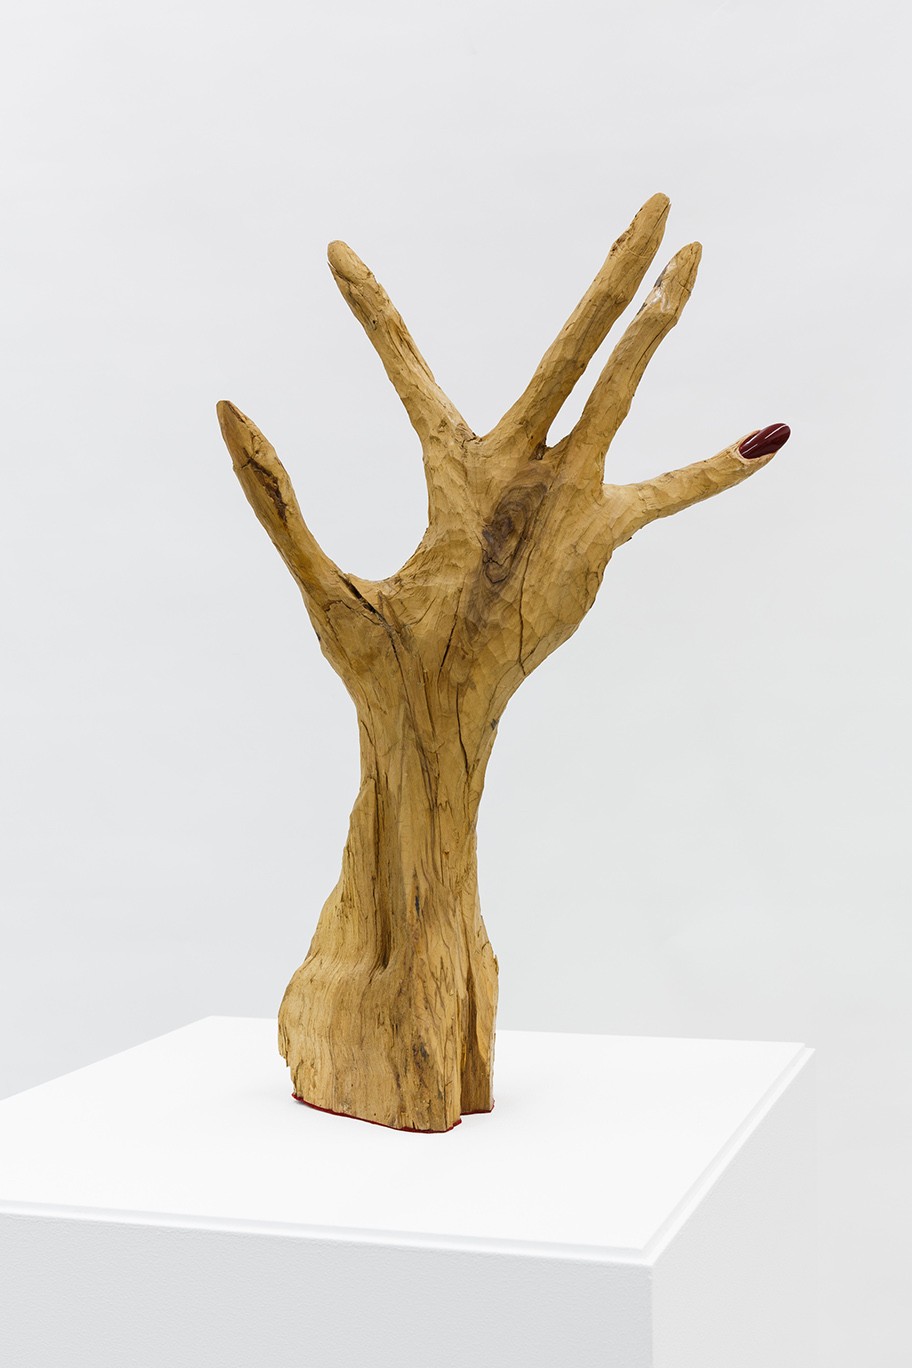 Alessandro Balteo-Yazbeck in collaboration with Attilio Napolitano (b. Modica 1936)  Nail polish 3000 BC, From the series All the Lands from Sunrise to Sunset, 2018 Acrylic nail polish on centenary olive wood, rabbit skin collagen-glue, insect-based shellac 56,5 x 34,5 x 17 cm 